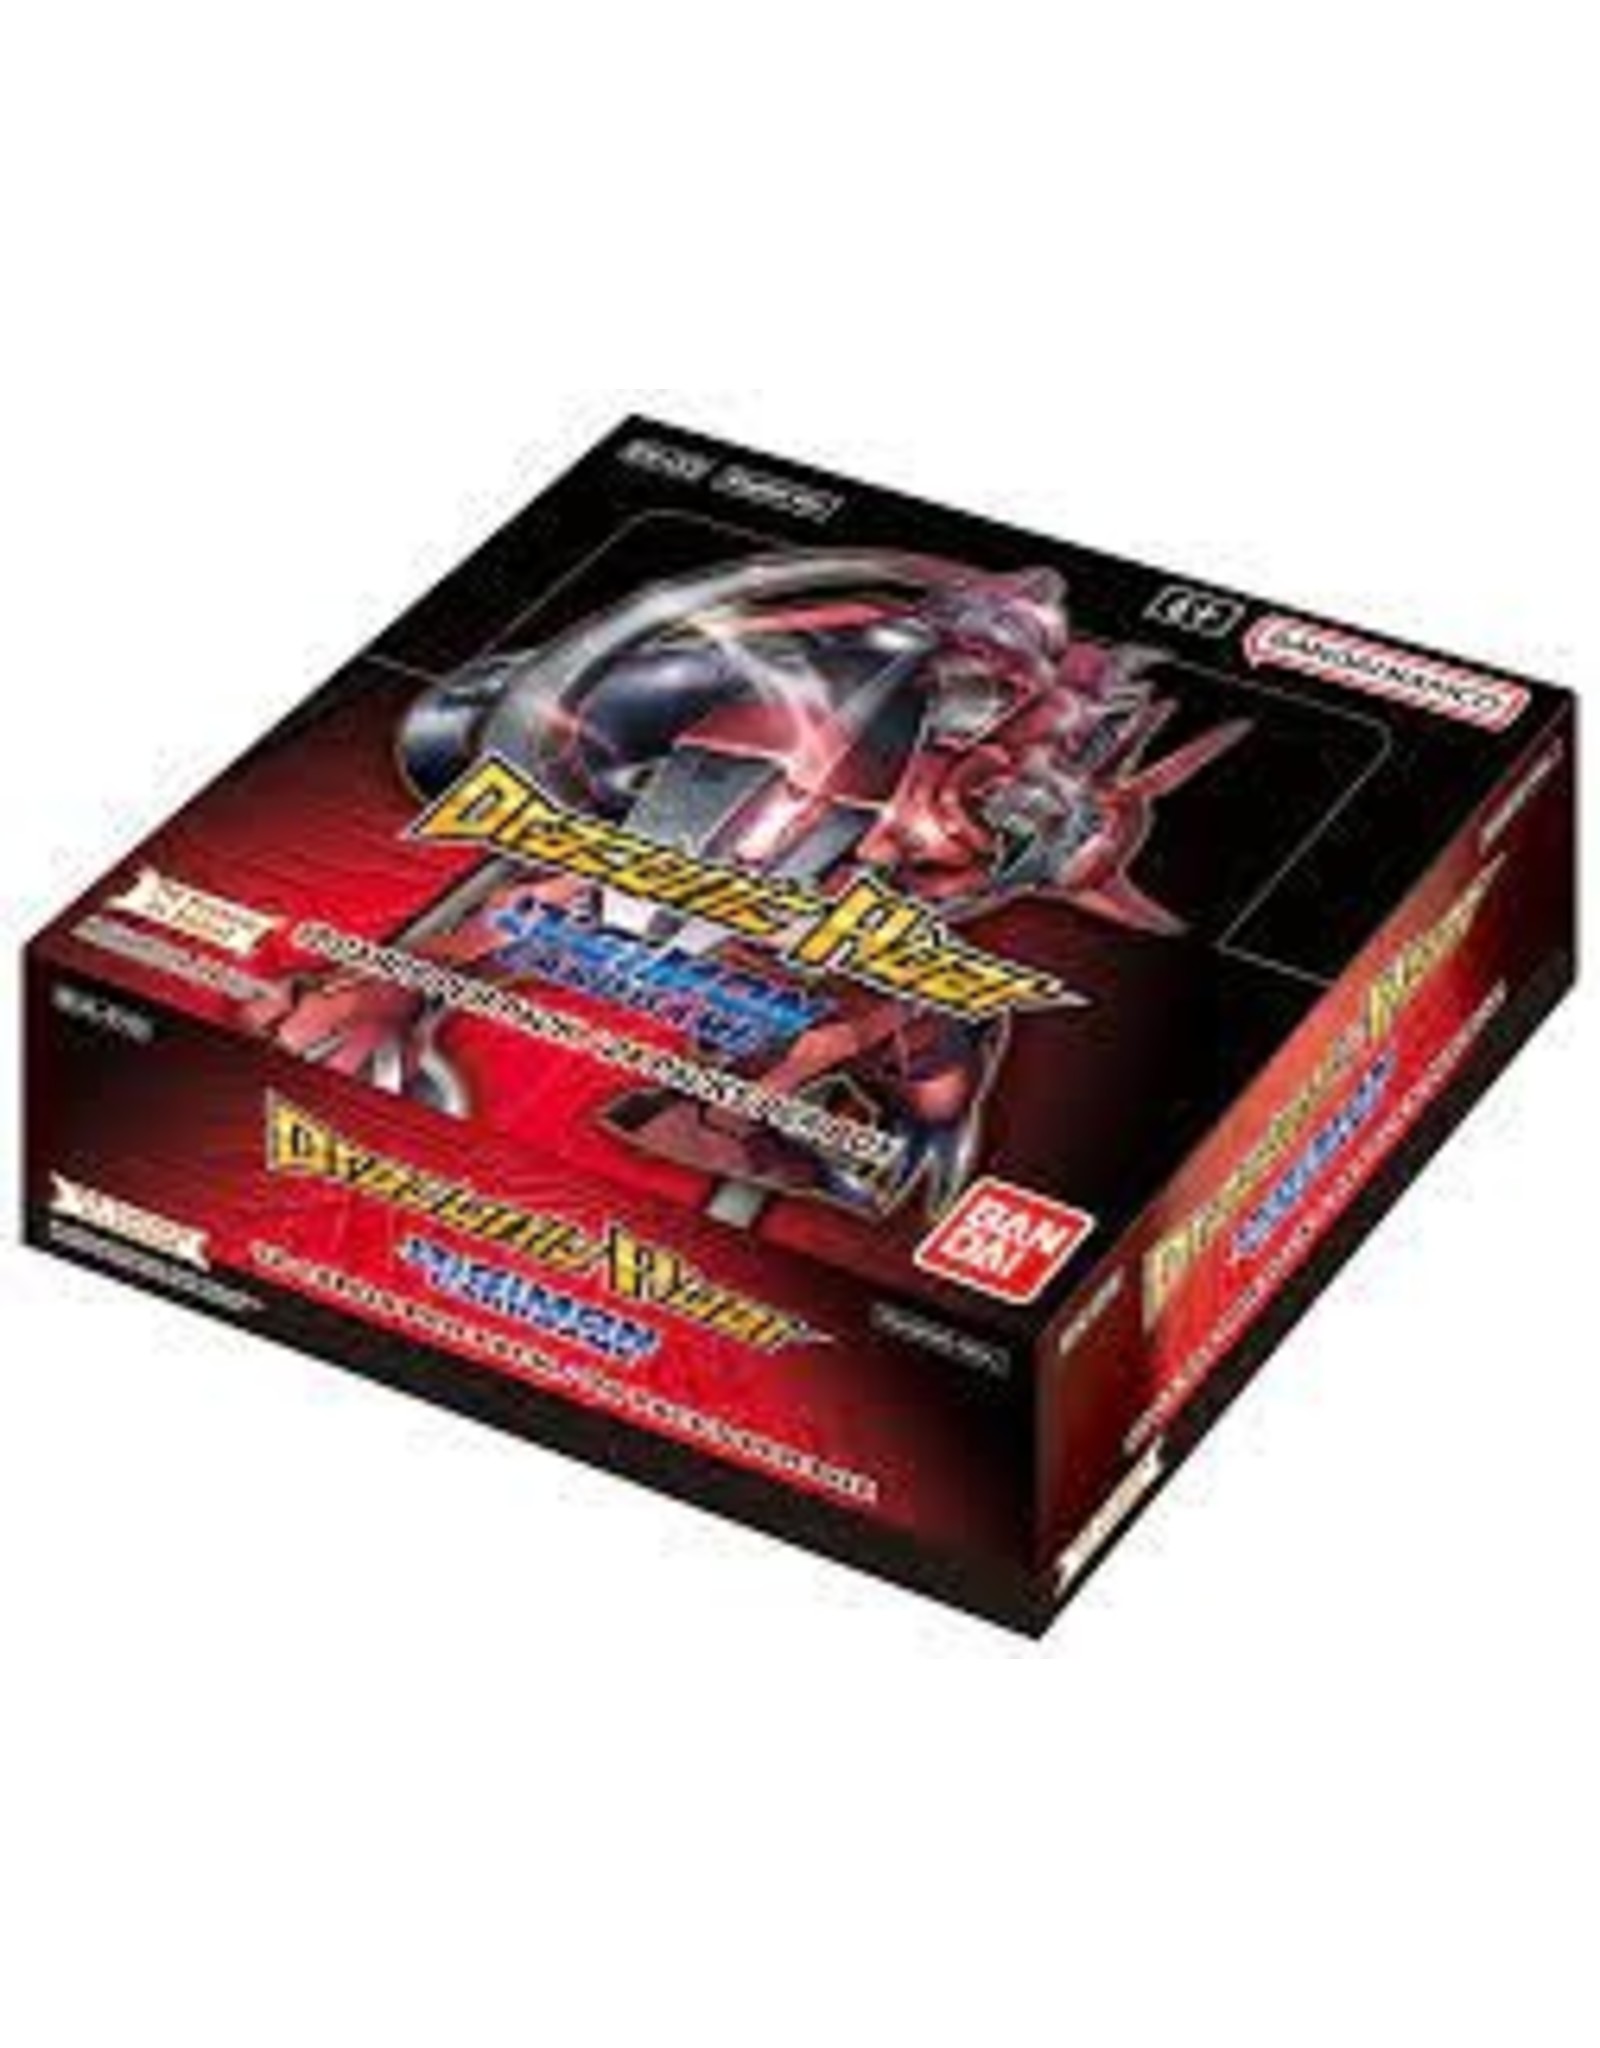 Digimon Draconic Roar Booster Box (Available Nov 12)